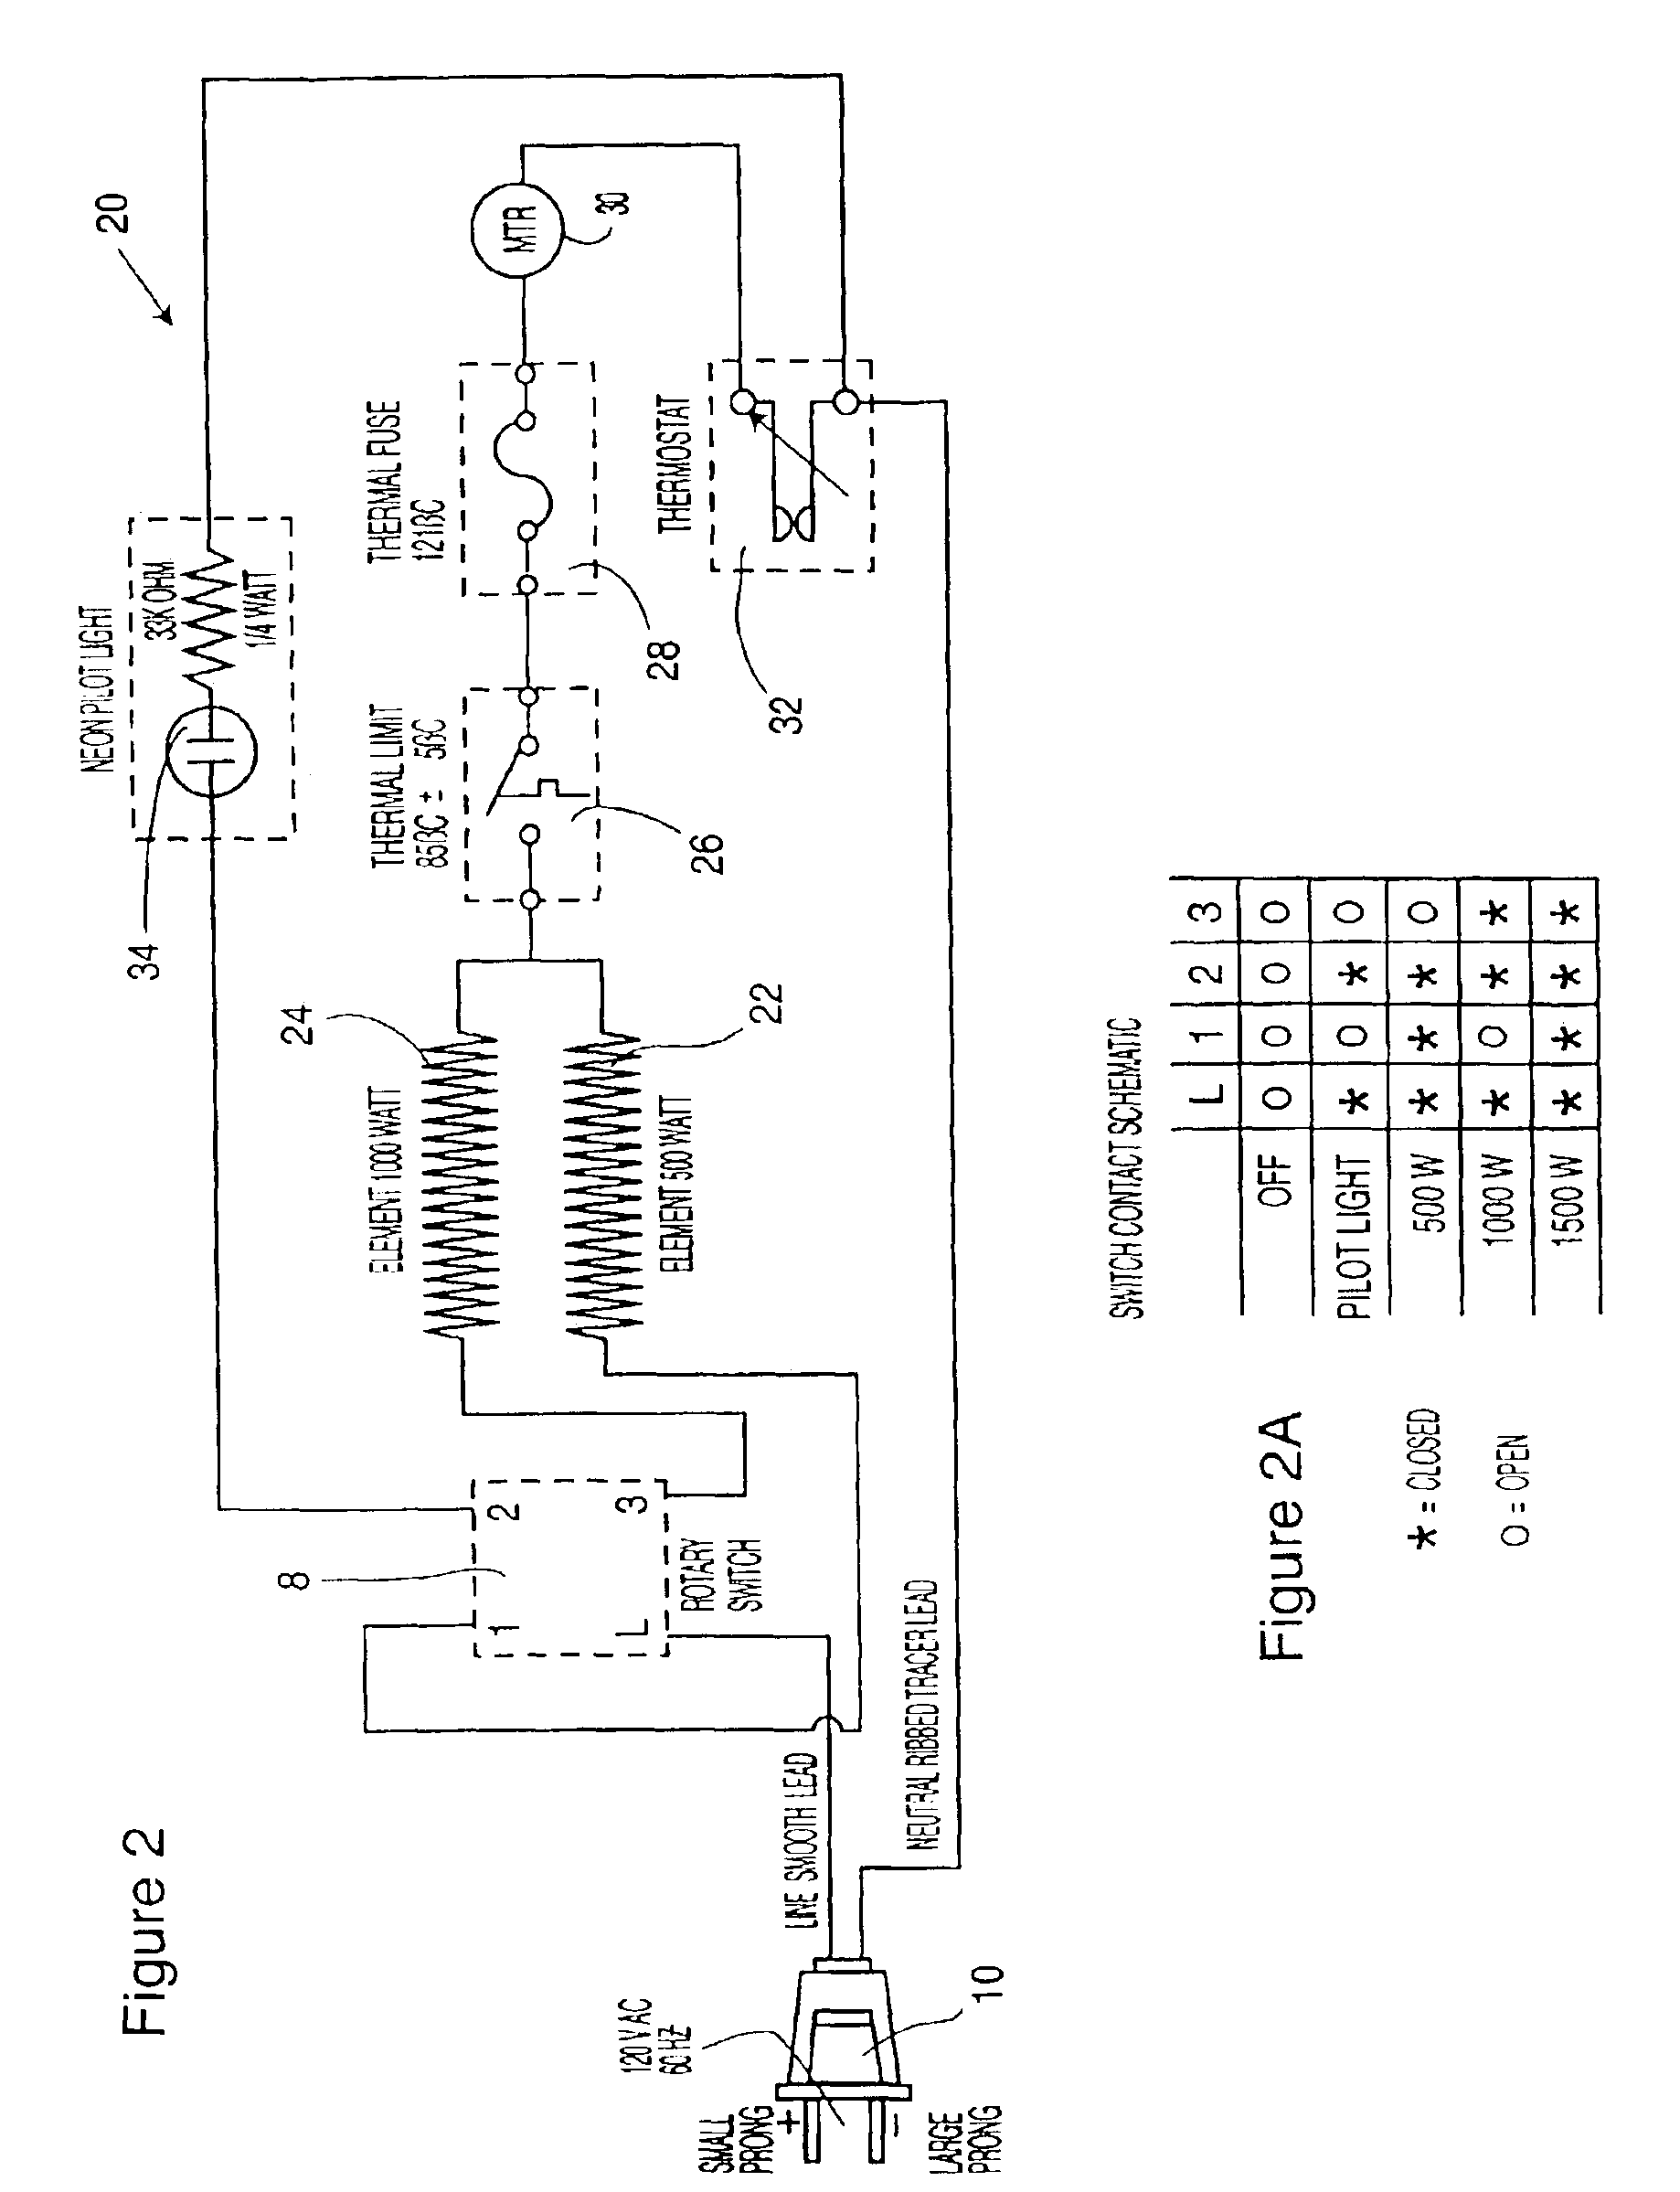 Electric circuit for portable heater